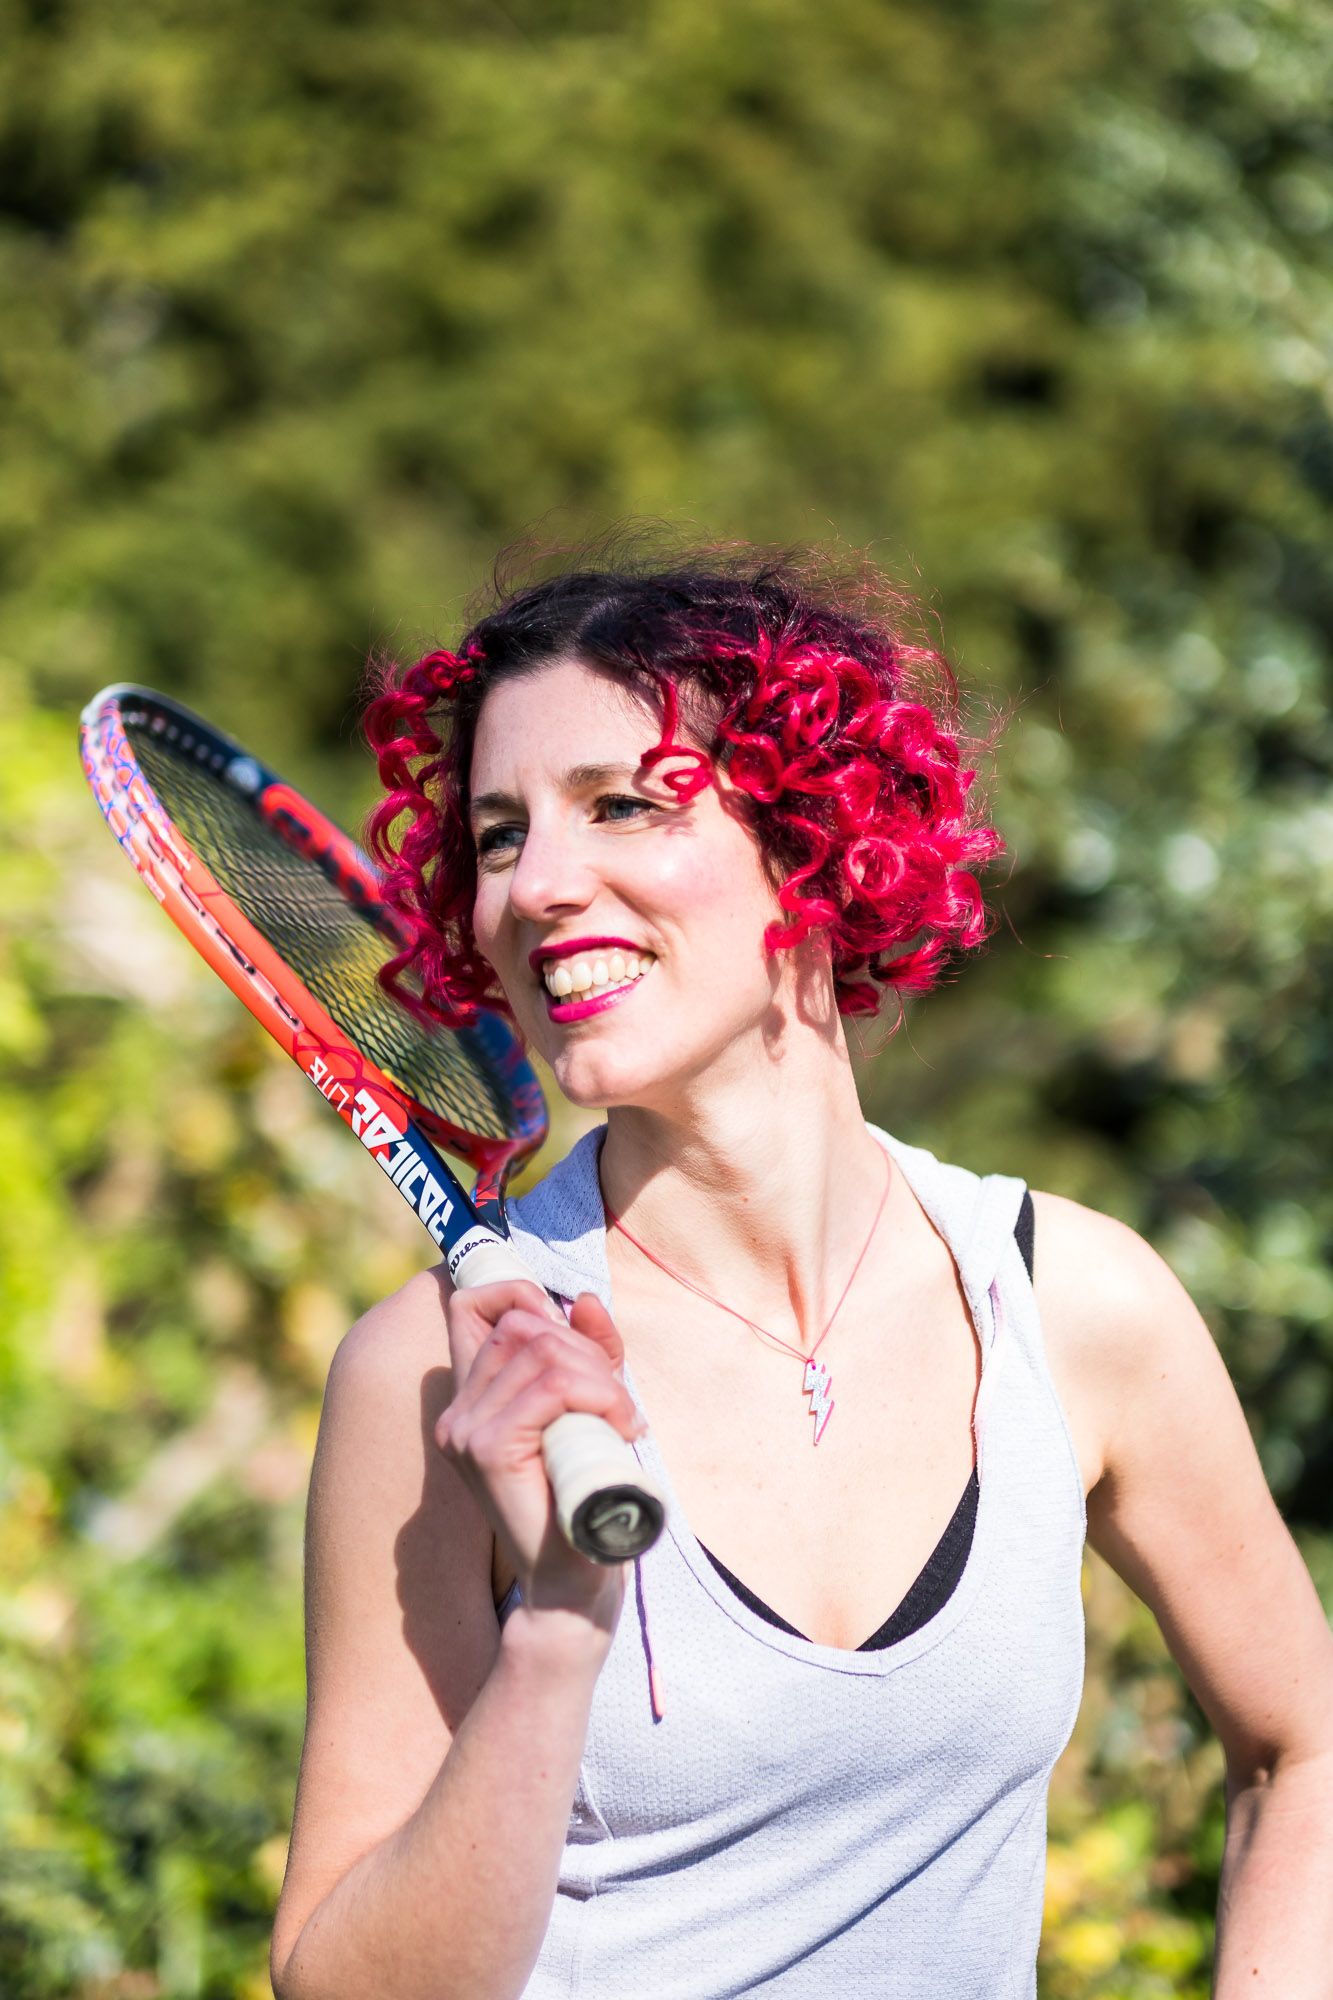 Health coach Lauren Stoney holding a tennis racket and smiling in Pavilion Gardens in Brighton